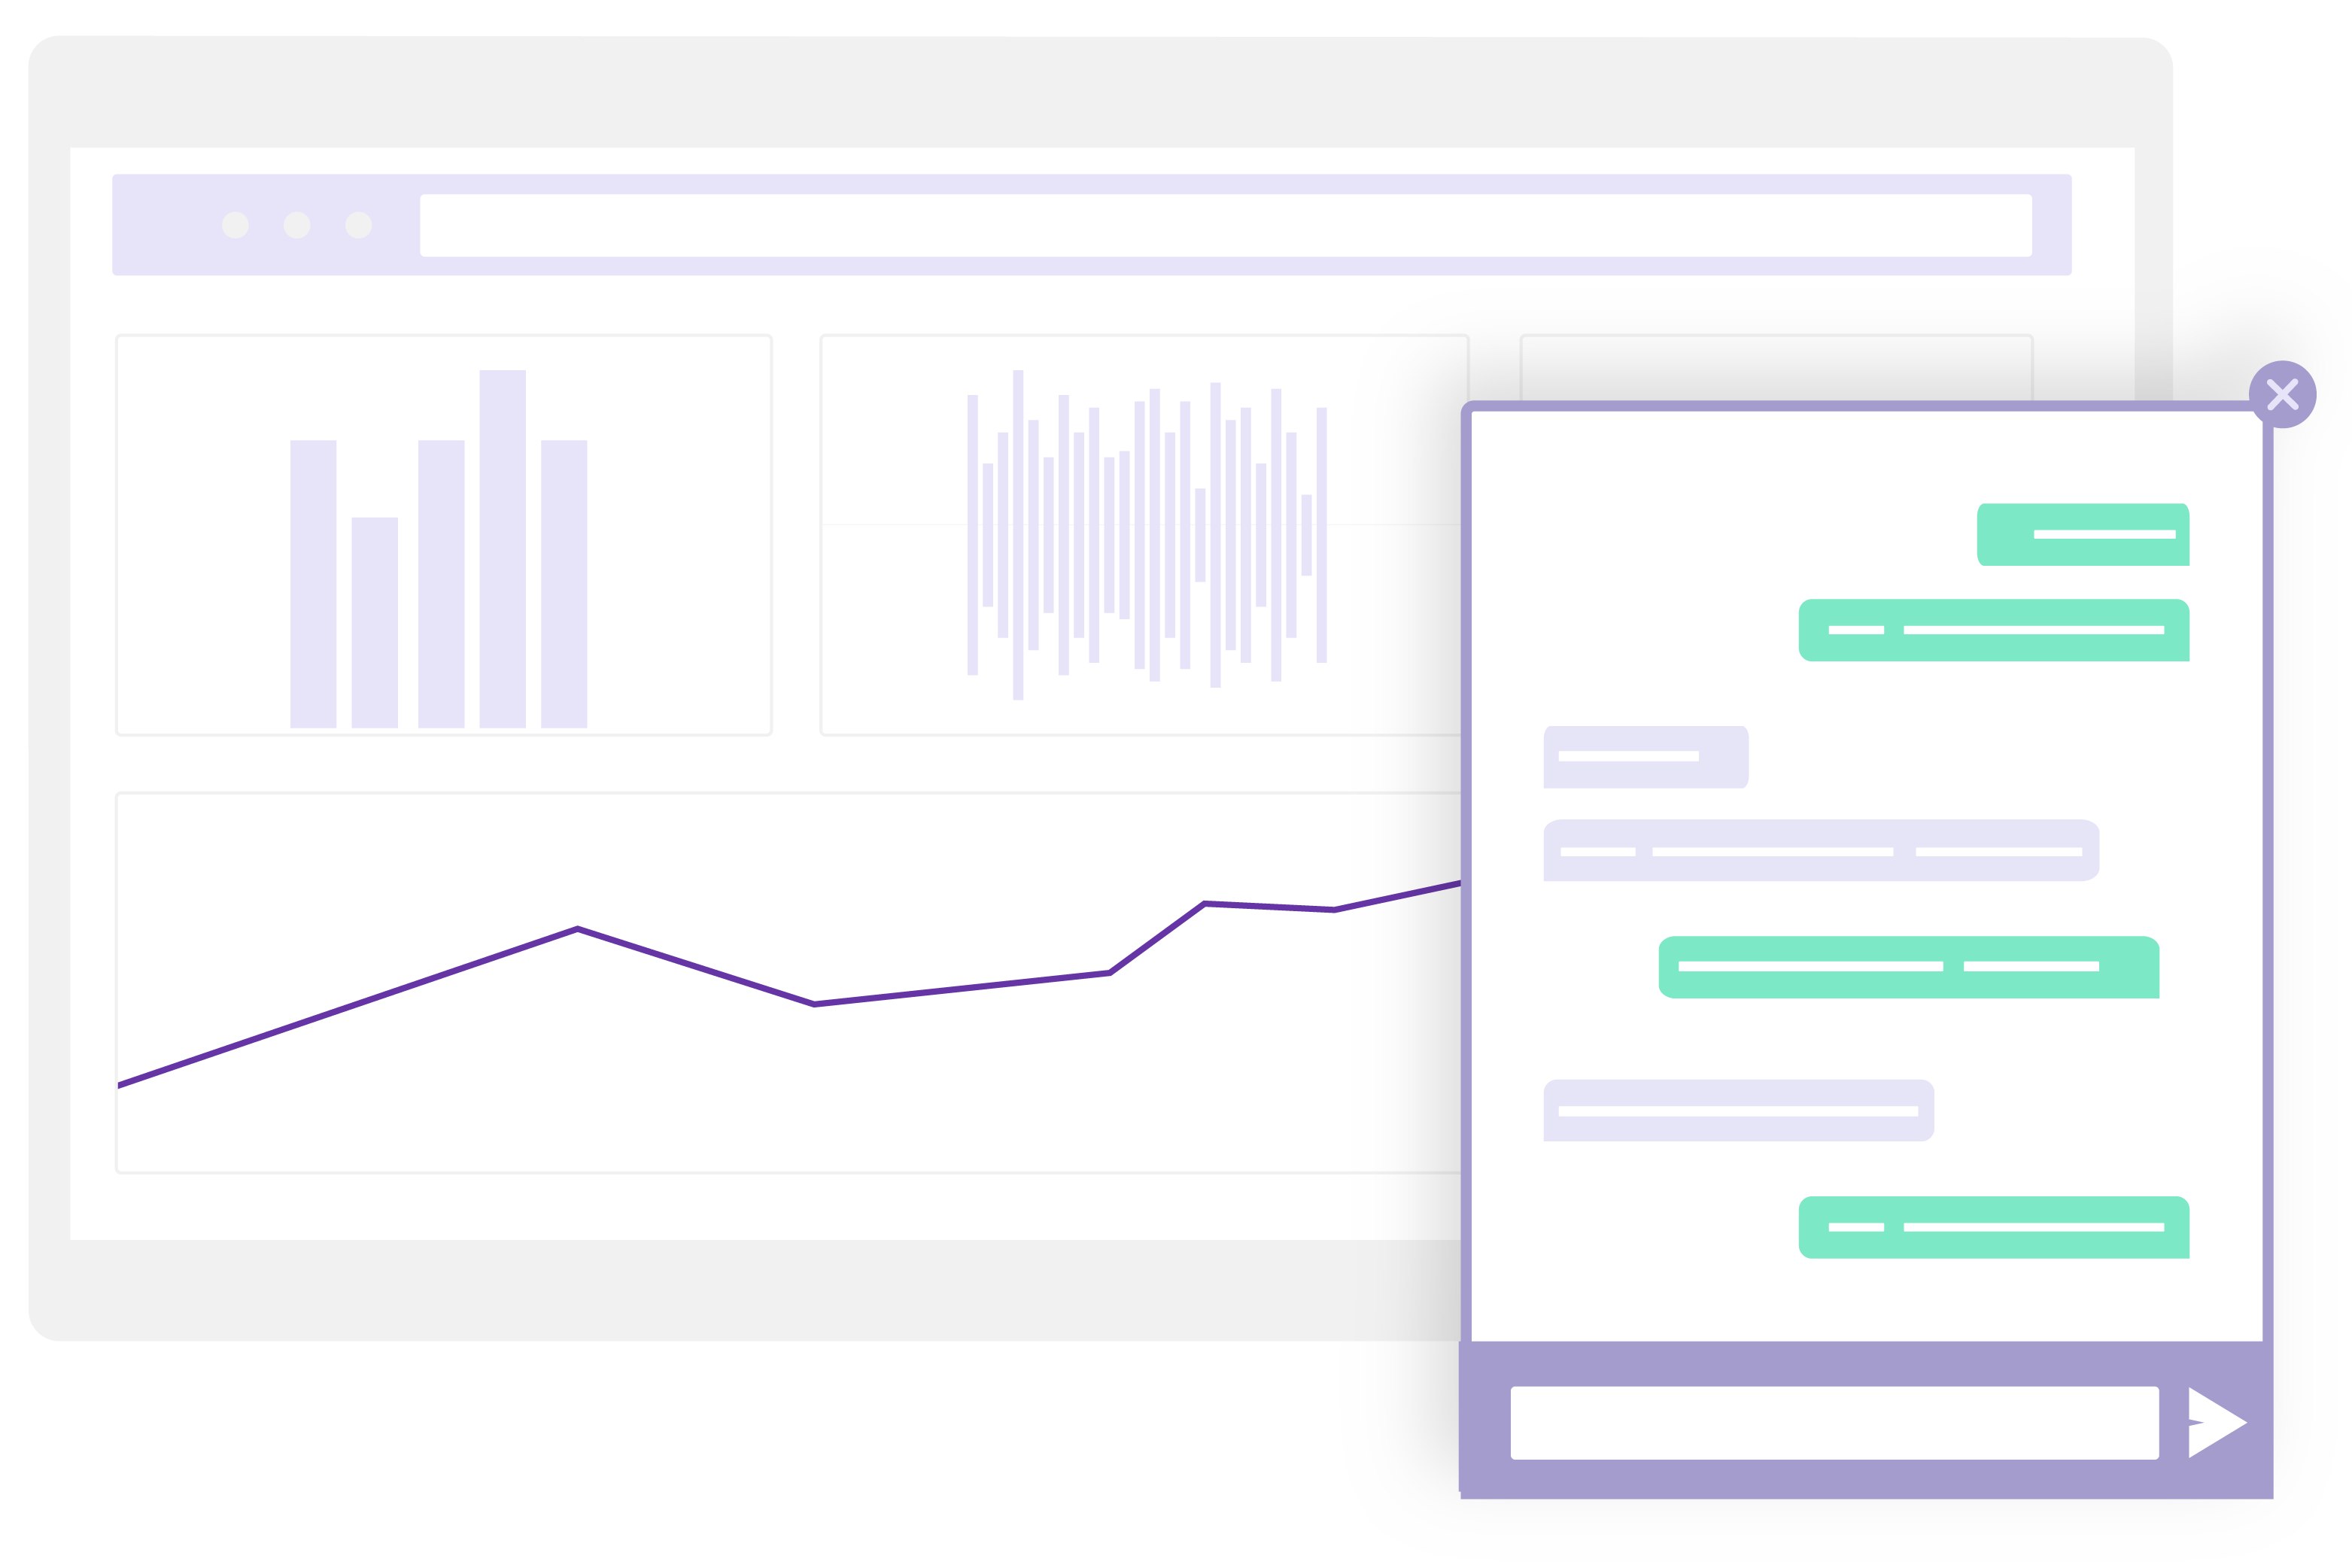 Measure user engagement for AI chatbots with JennyBot Analytics